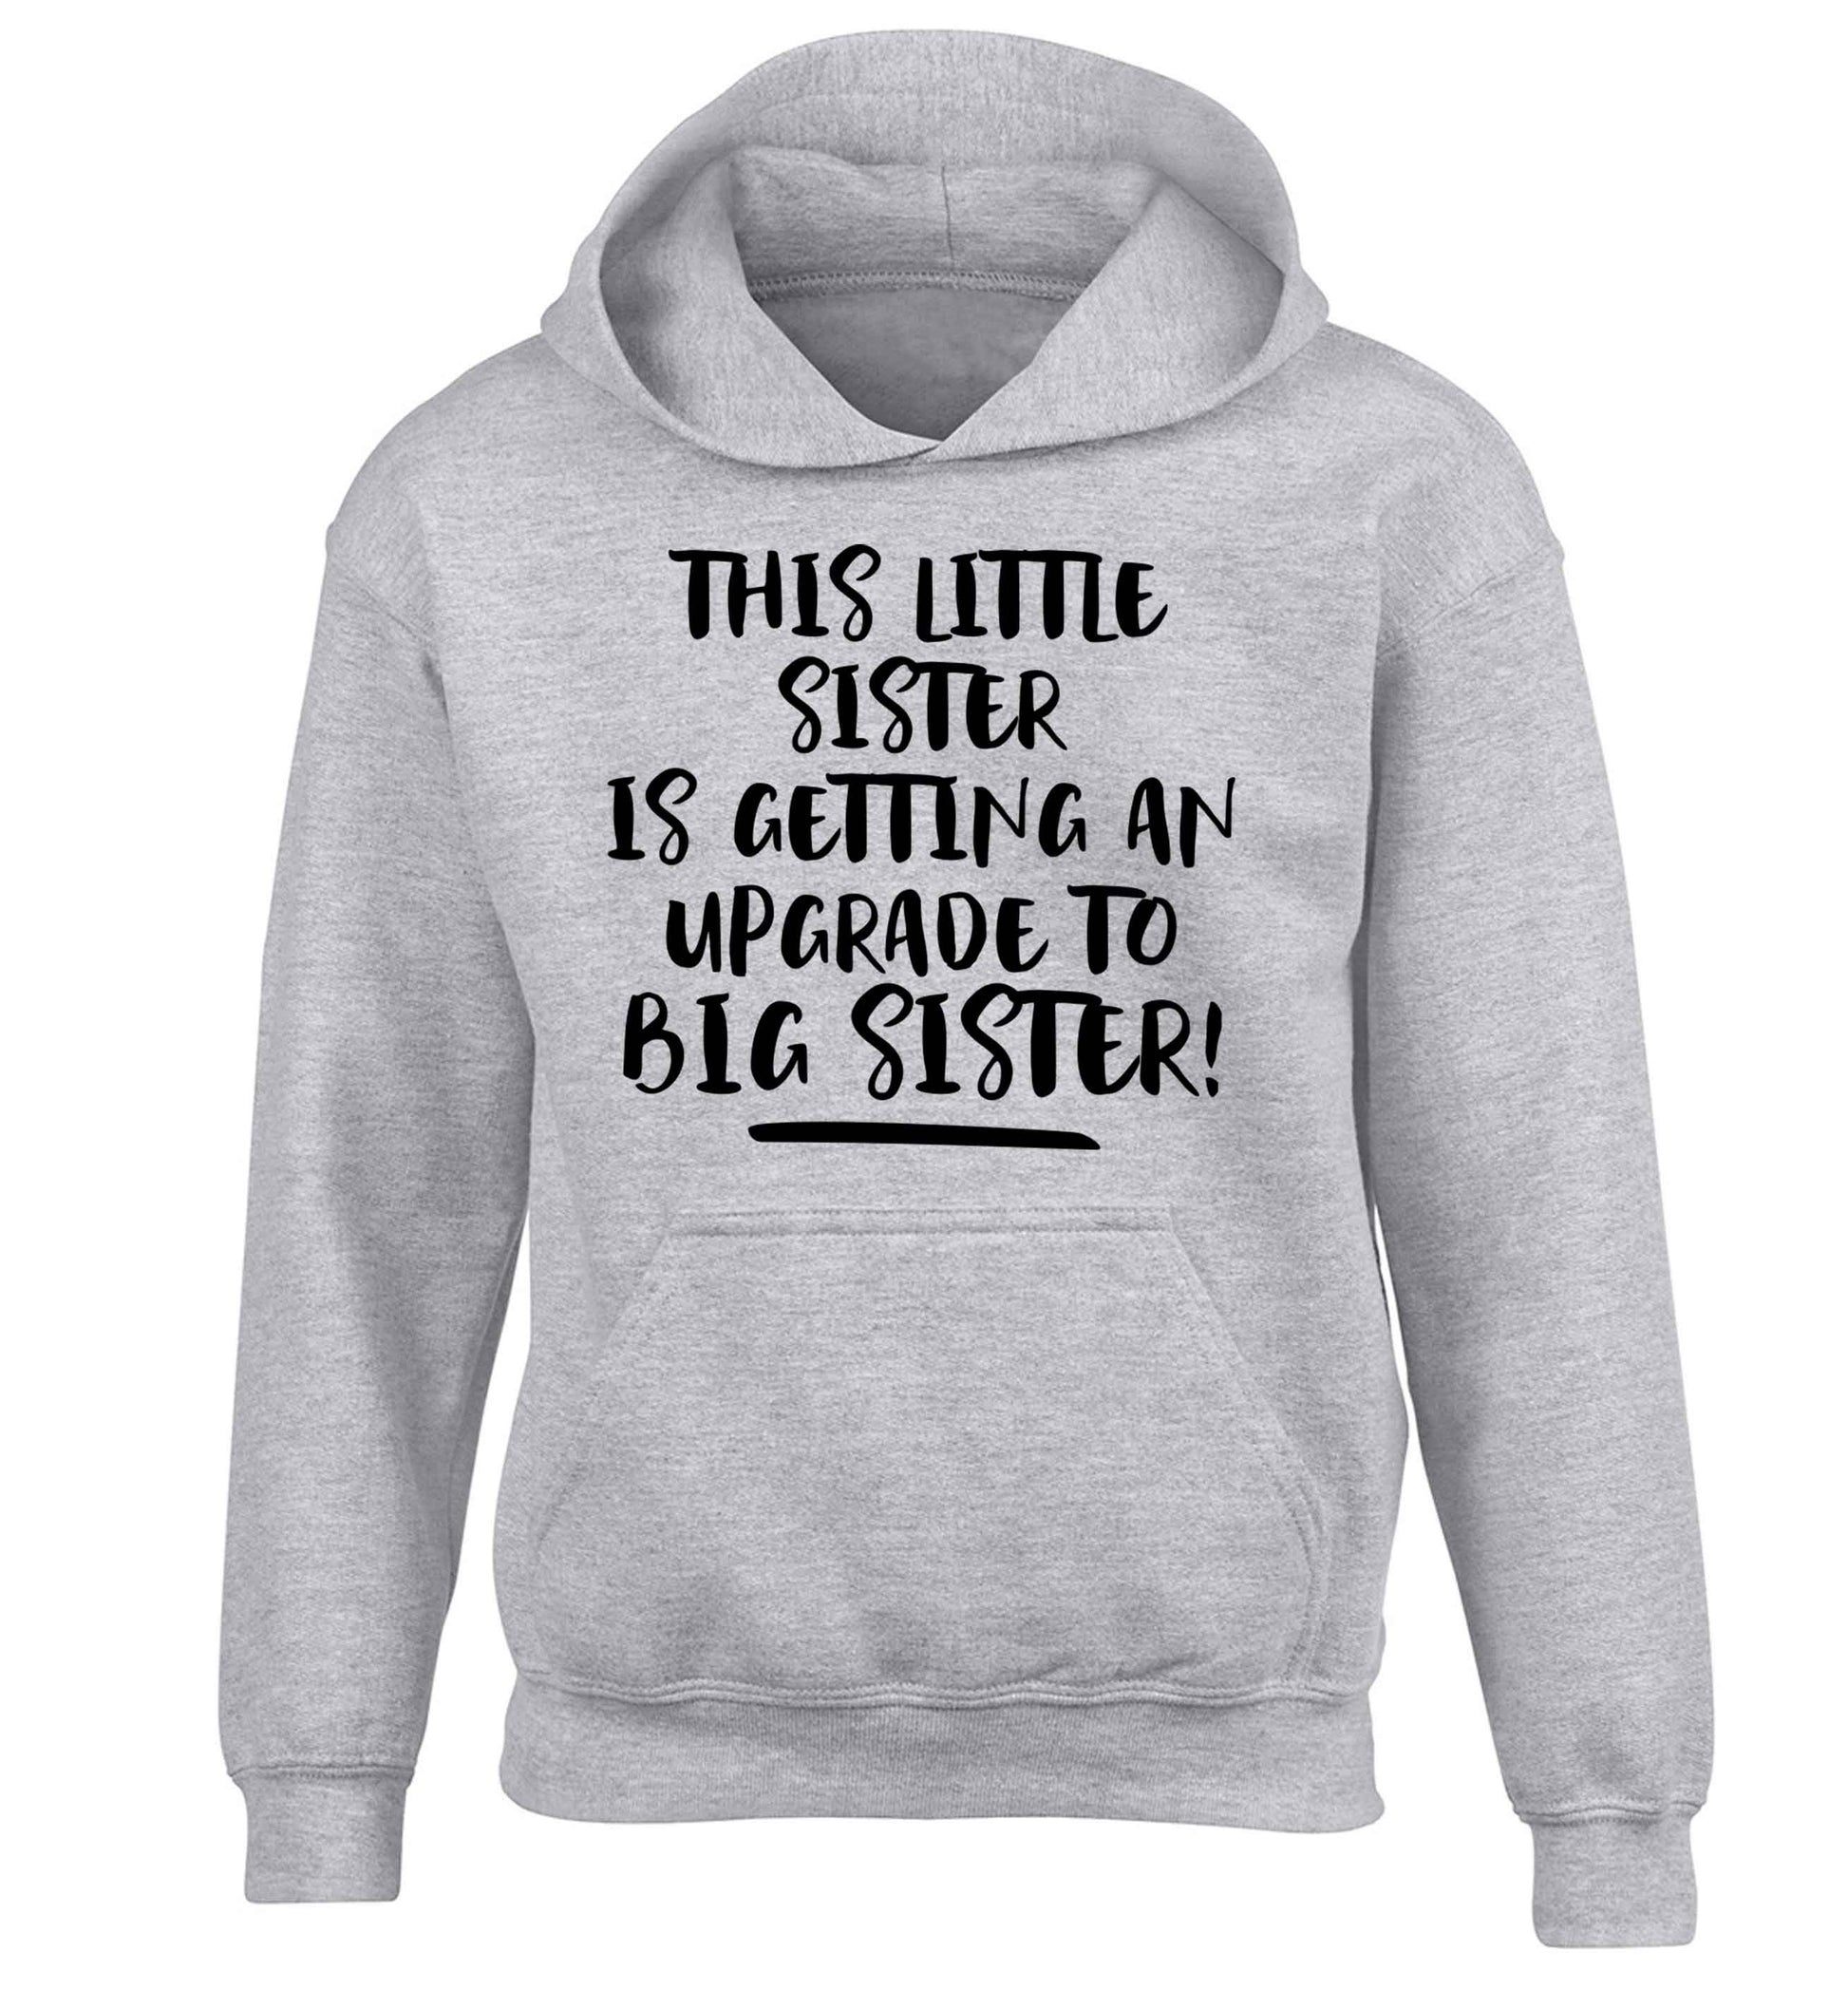 This little sister is getting an upgrade to big sister! children's grey hoodie 12-13 Years